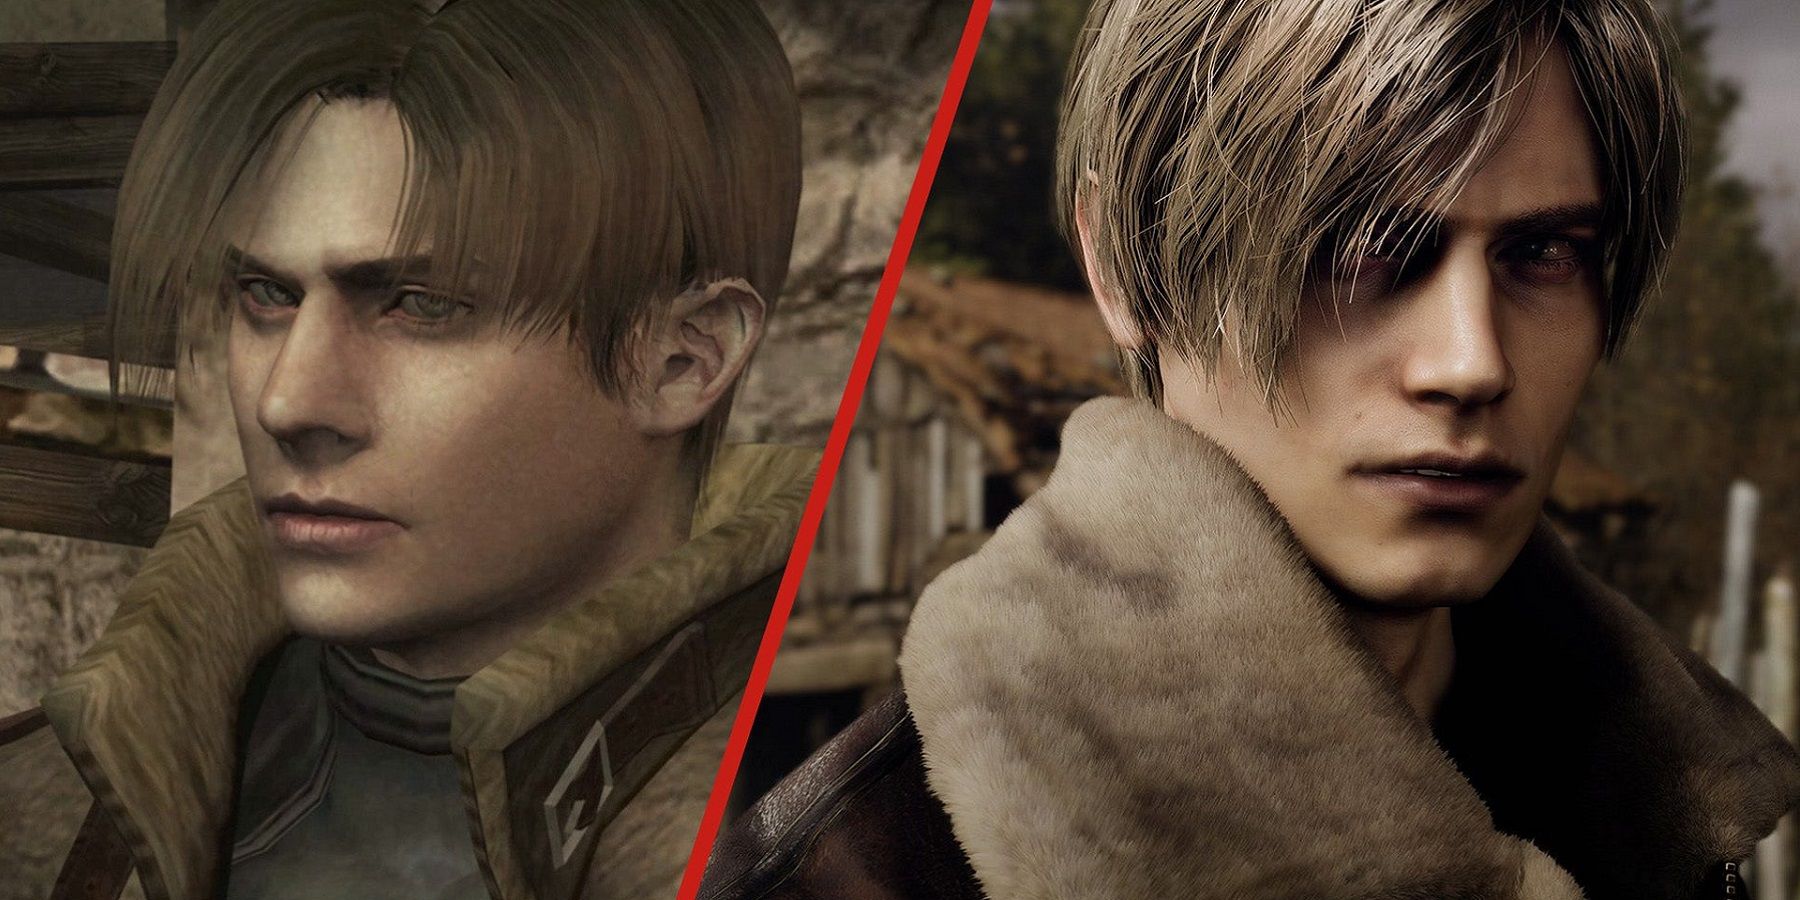 Split image from Resident Evil 4 and the remake showing the original Leon Kennedy and the remade version side-by-side.